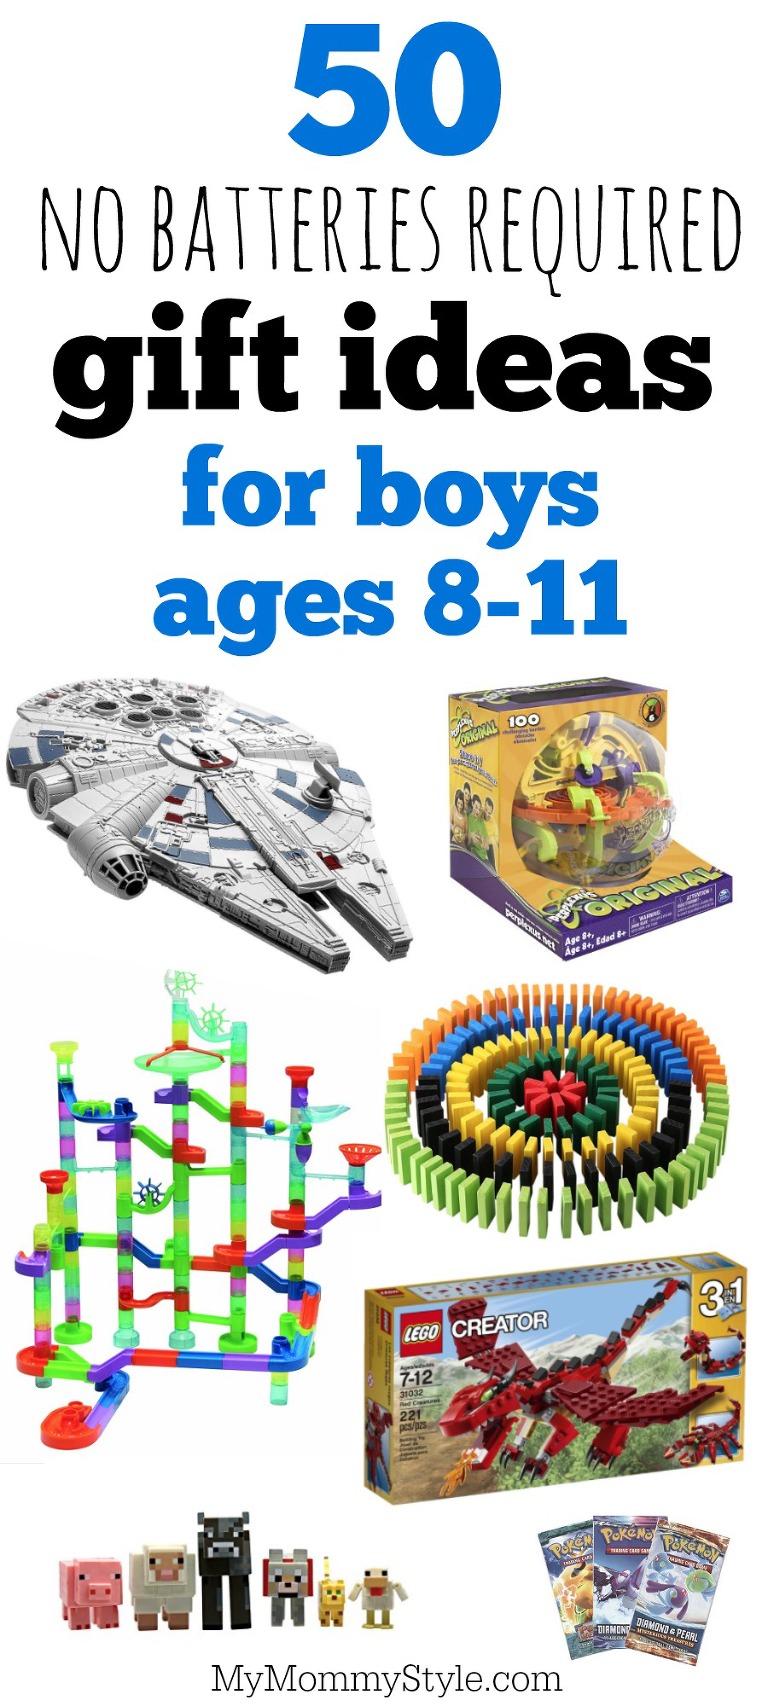 50-no-batteries-required-gift-ideas-for-boys